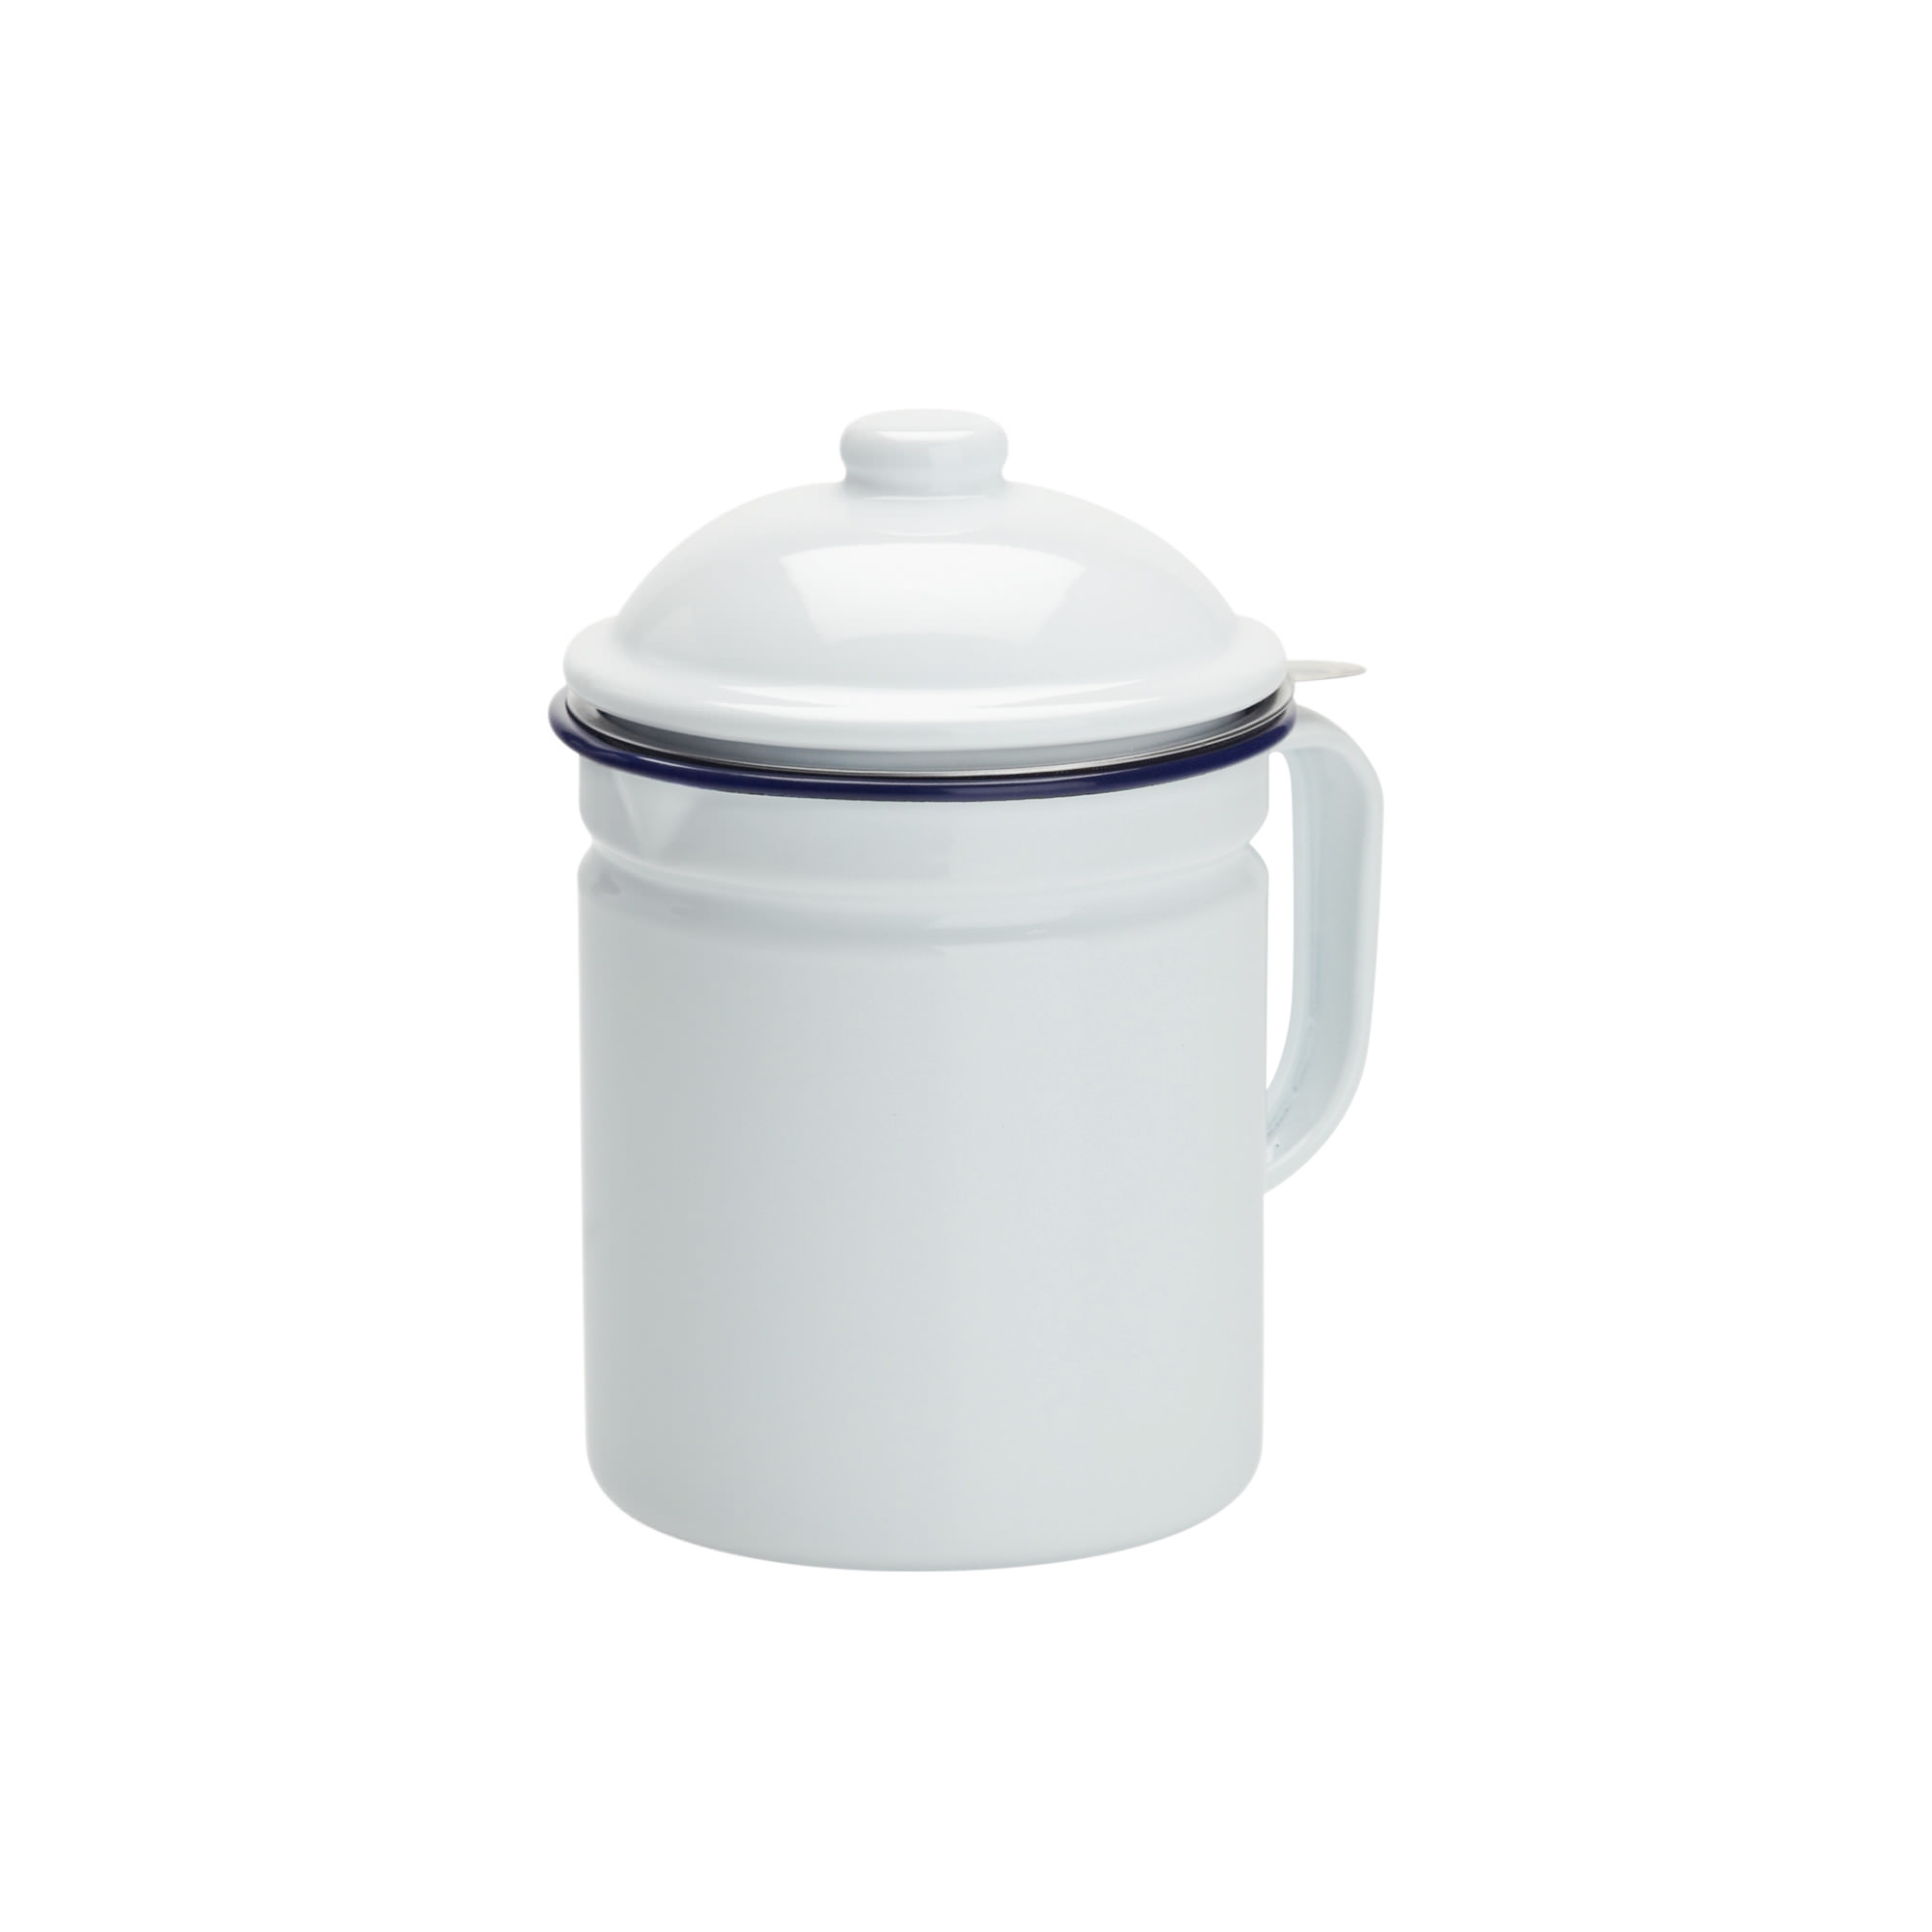 Falcon Enamelware Dripping Container White Image 1